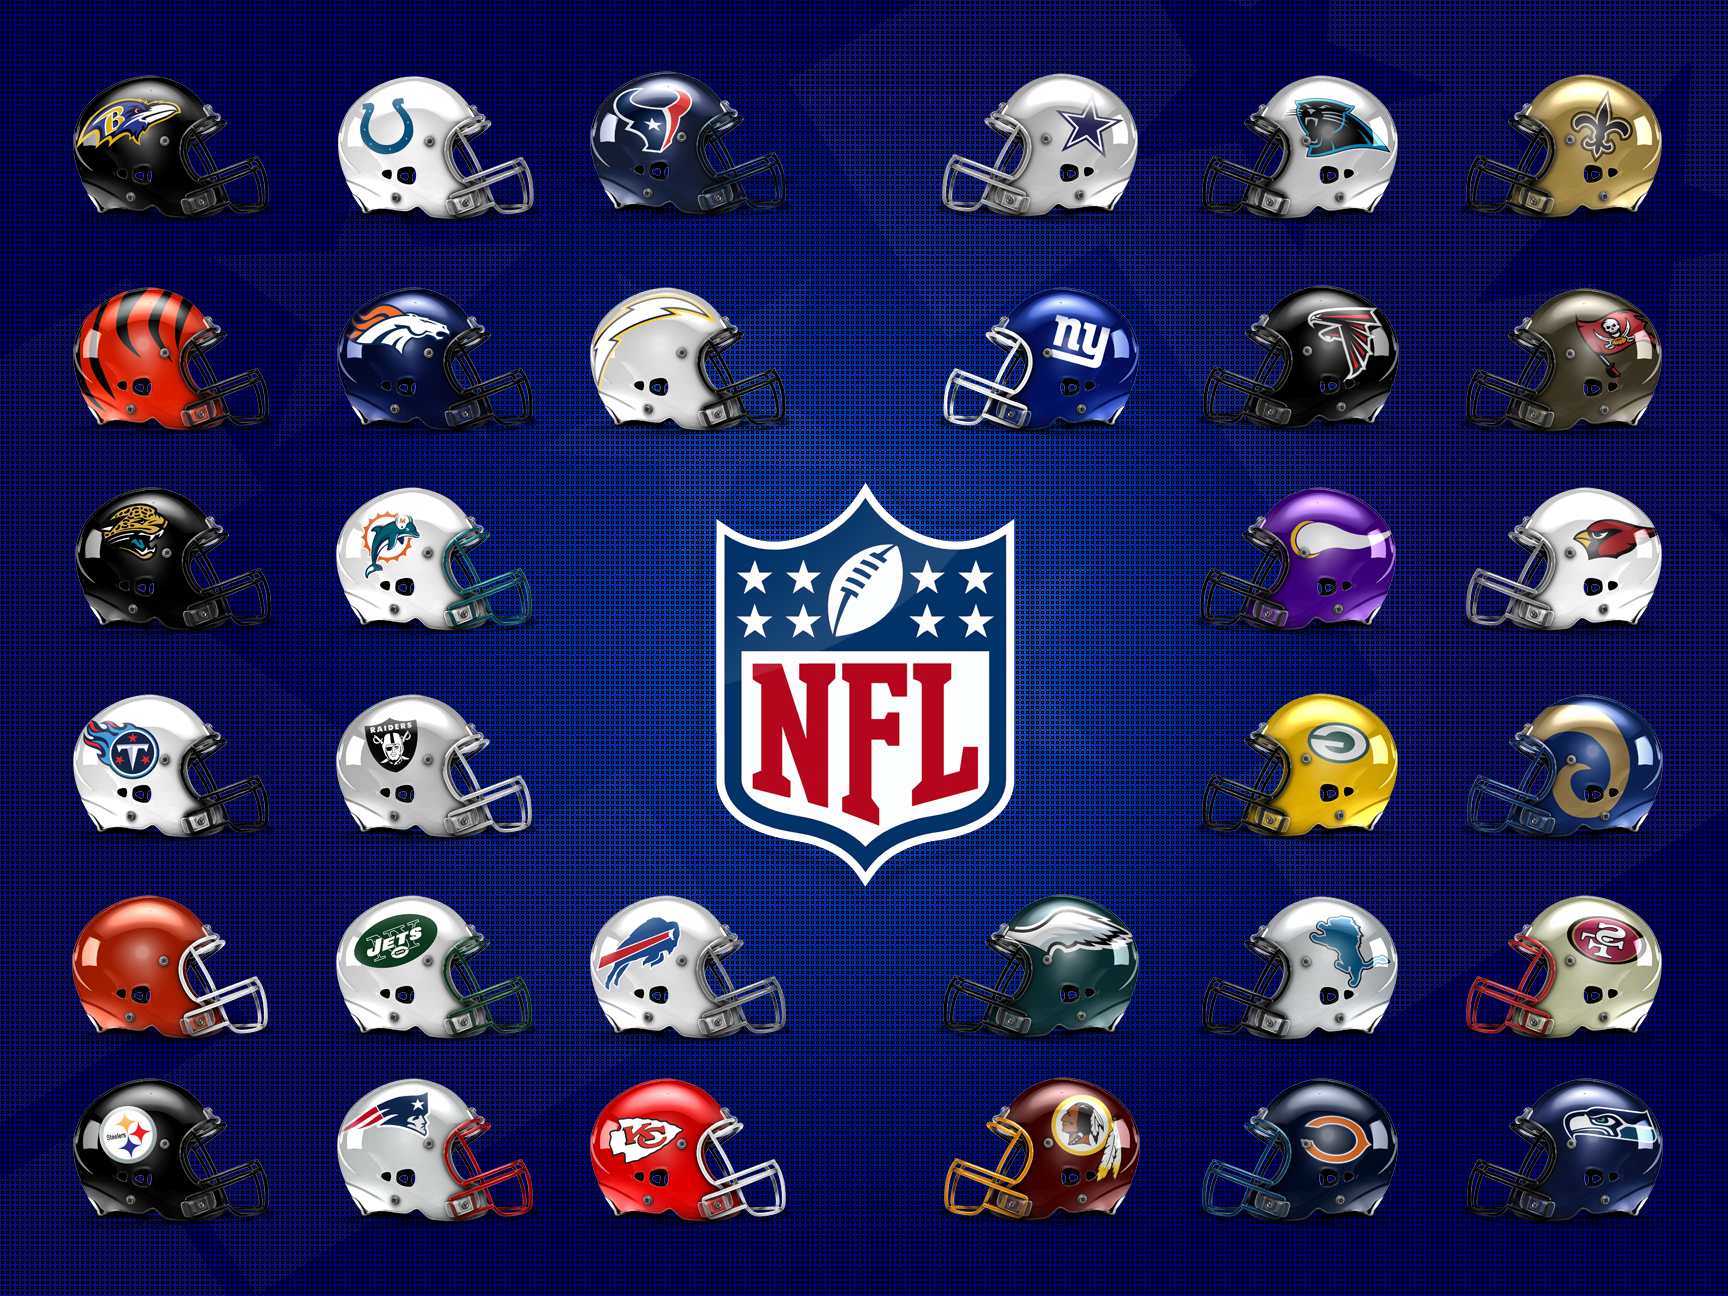 Free download NFL Helmet Poster by SpaceDyeDesigns [1728x1296] for your